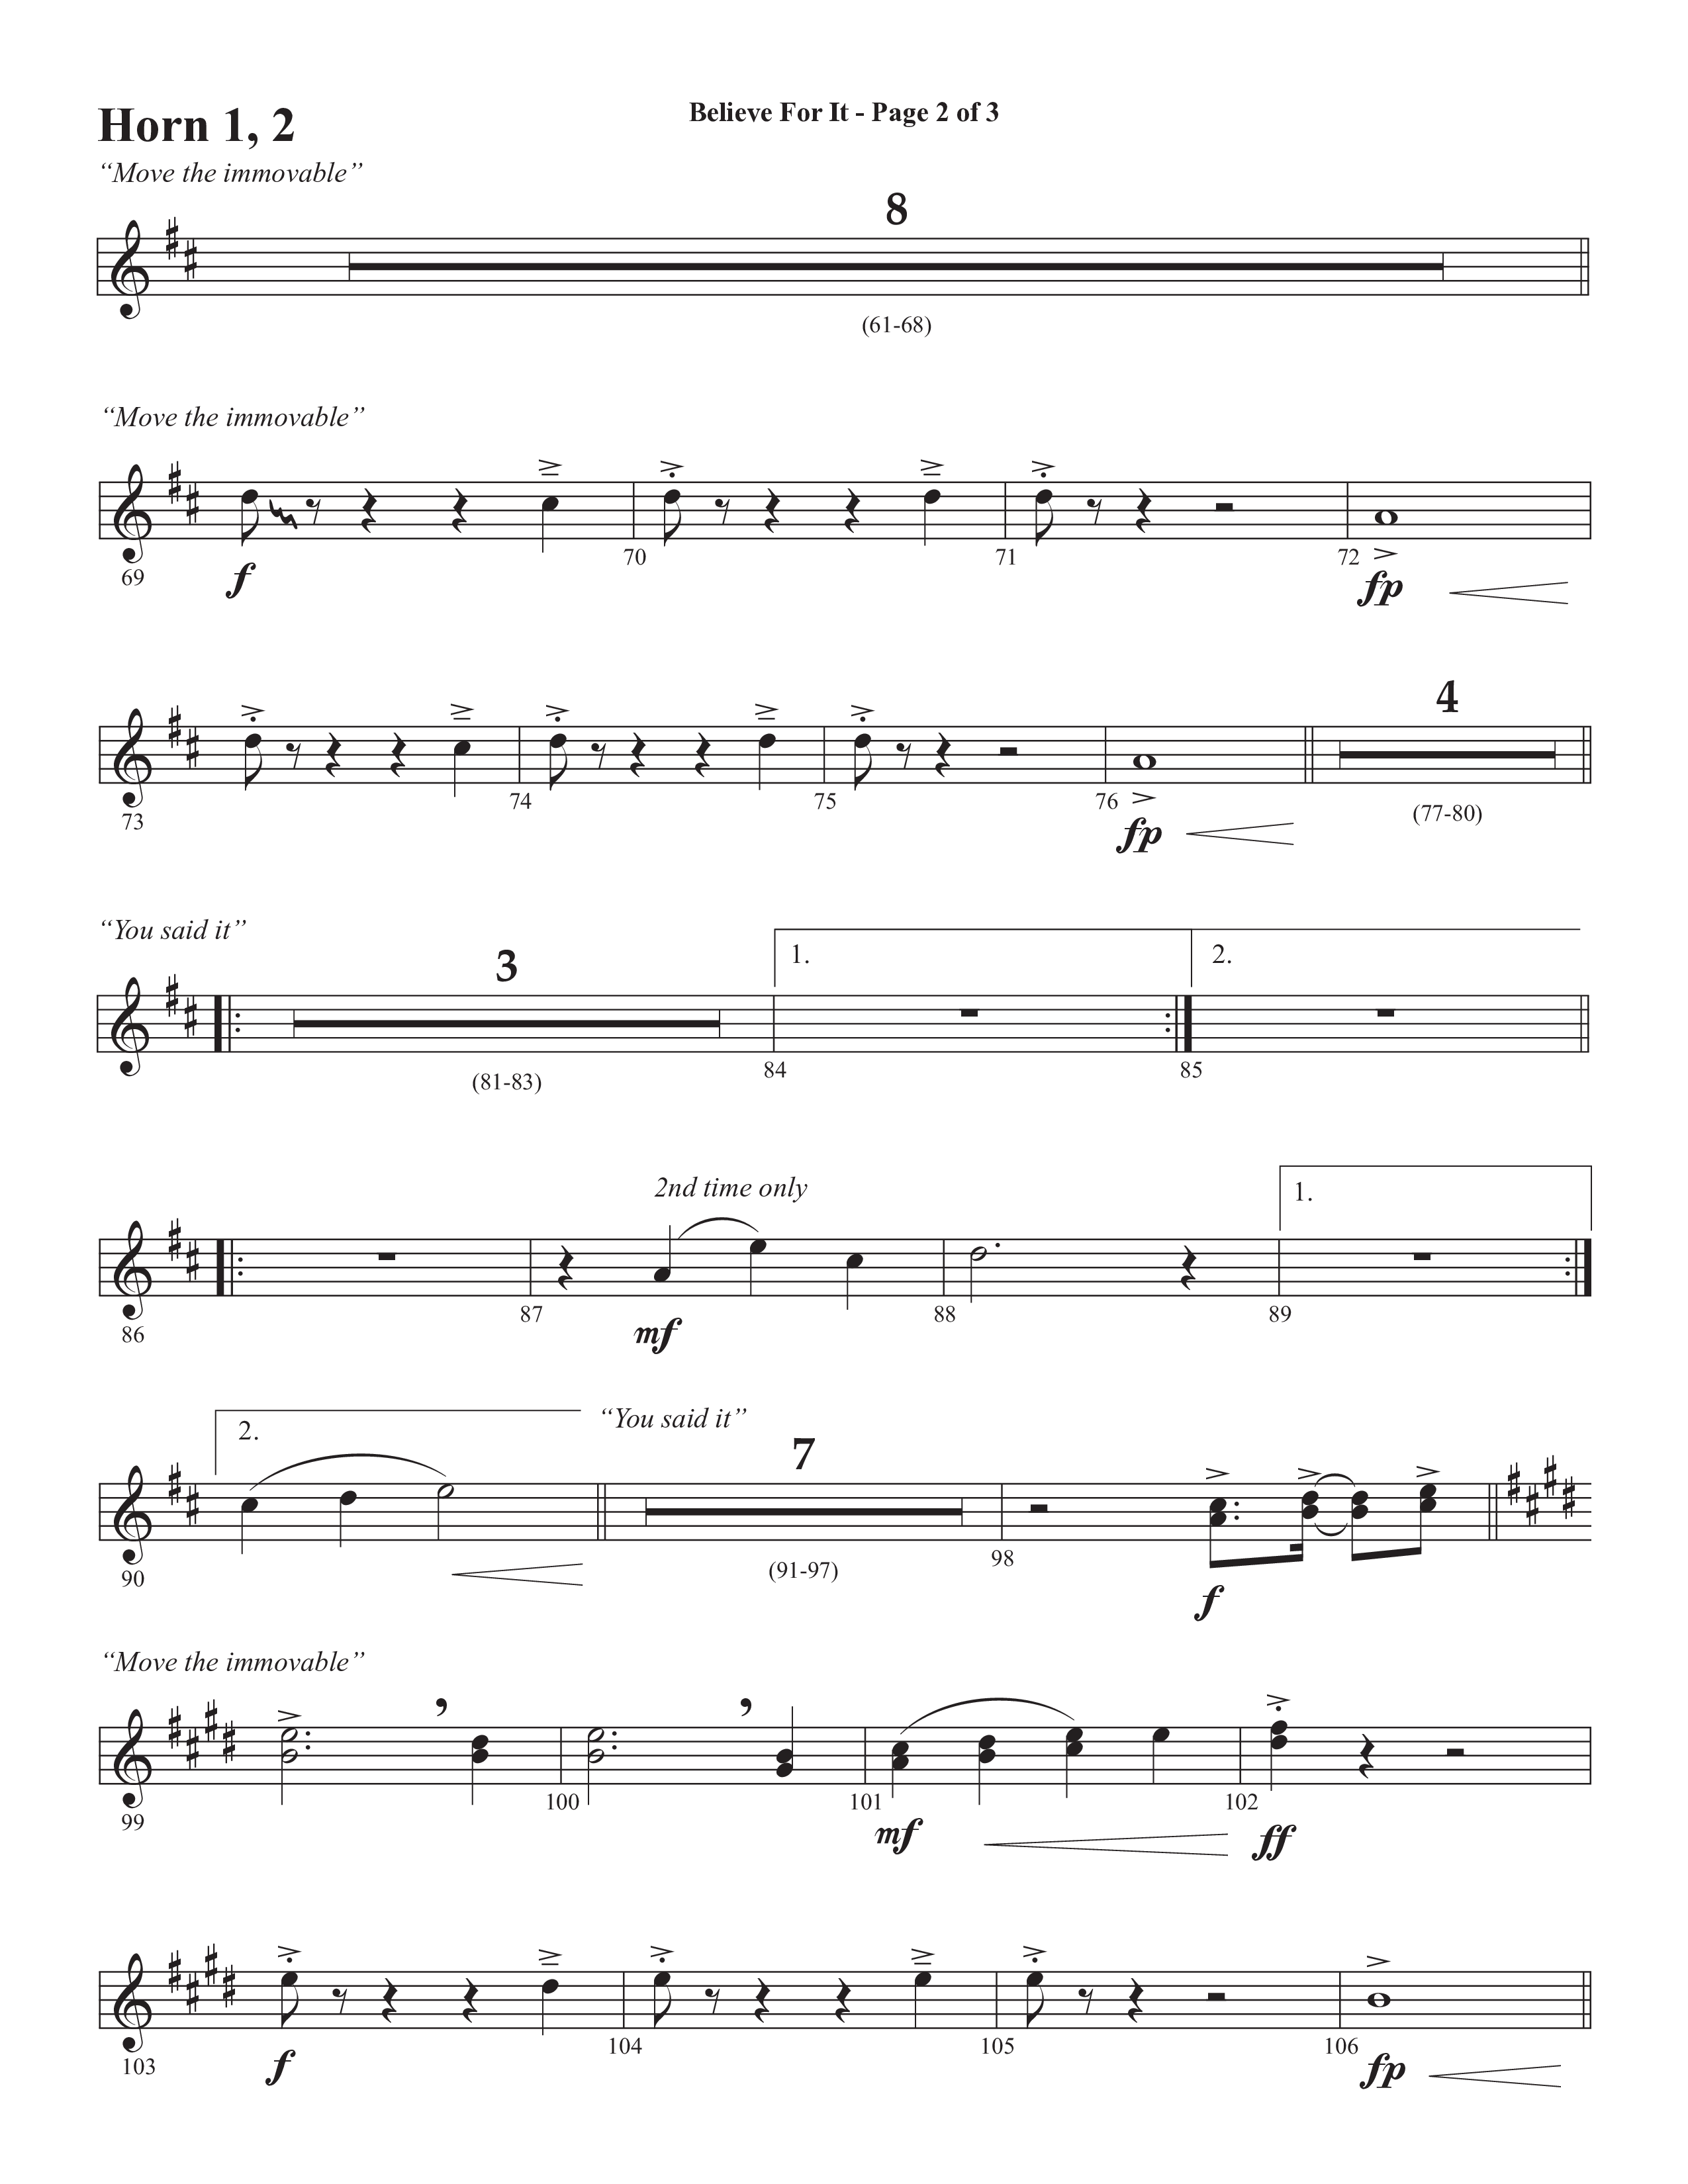 Believe For It (Choral Anthem SATB) French Horn 1/2 (Semsen Music / Arr. Phil Nitz)